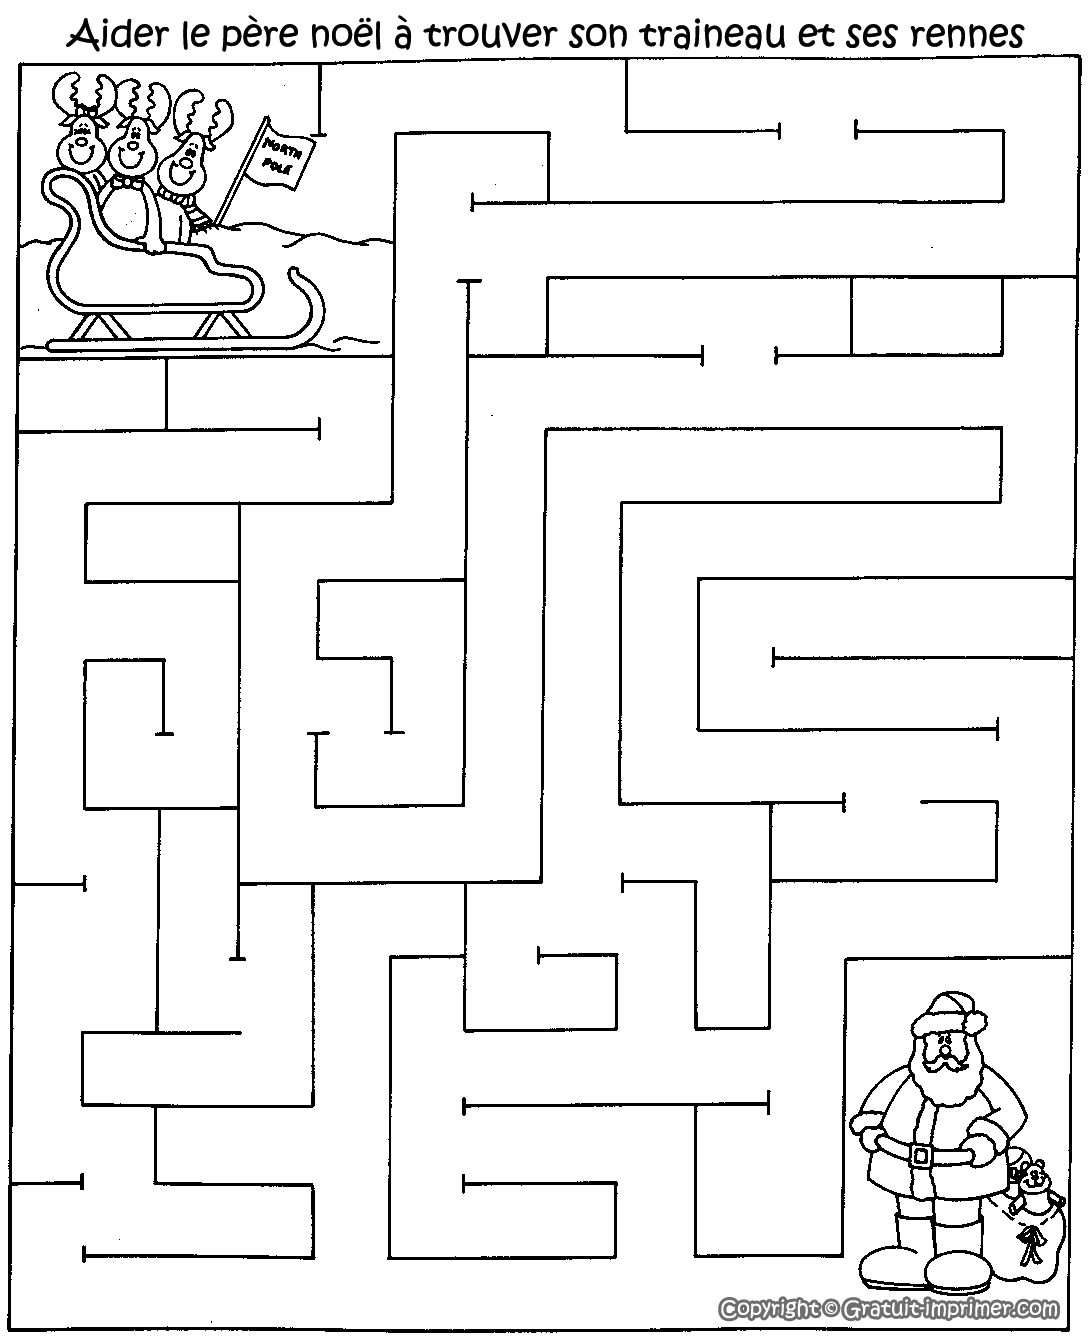 Free Labyrinths coloring page to download : Santa Claus